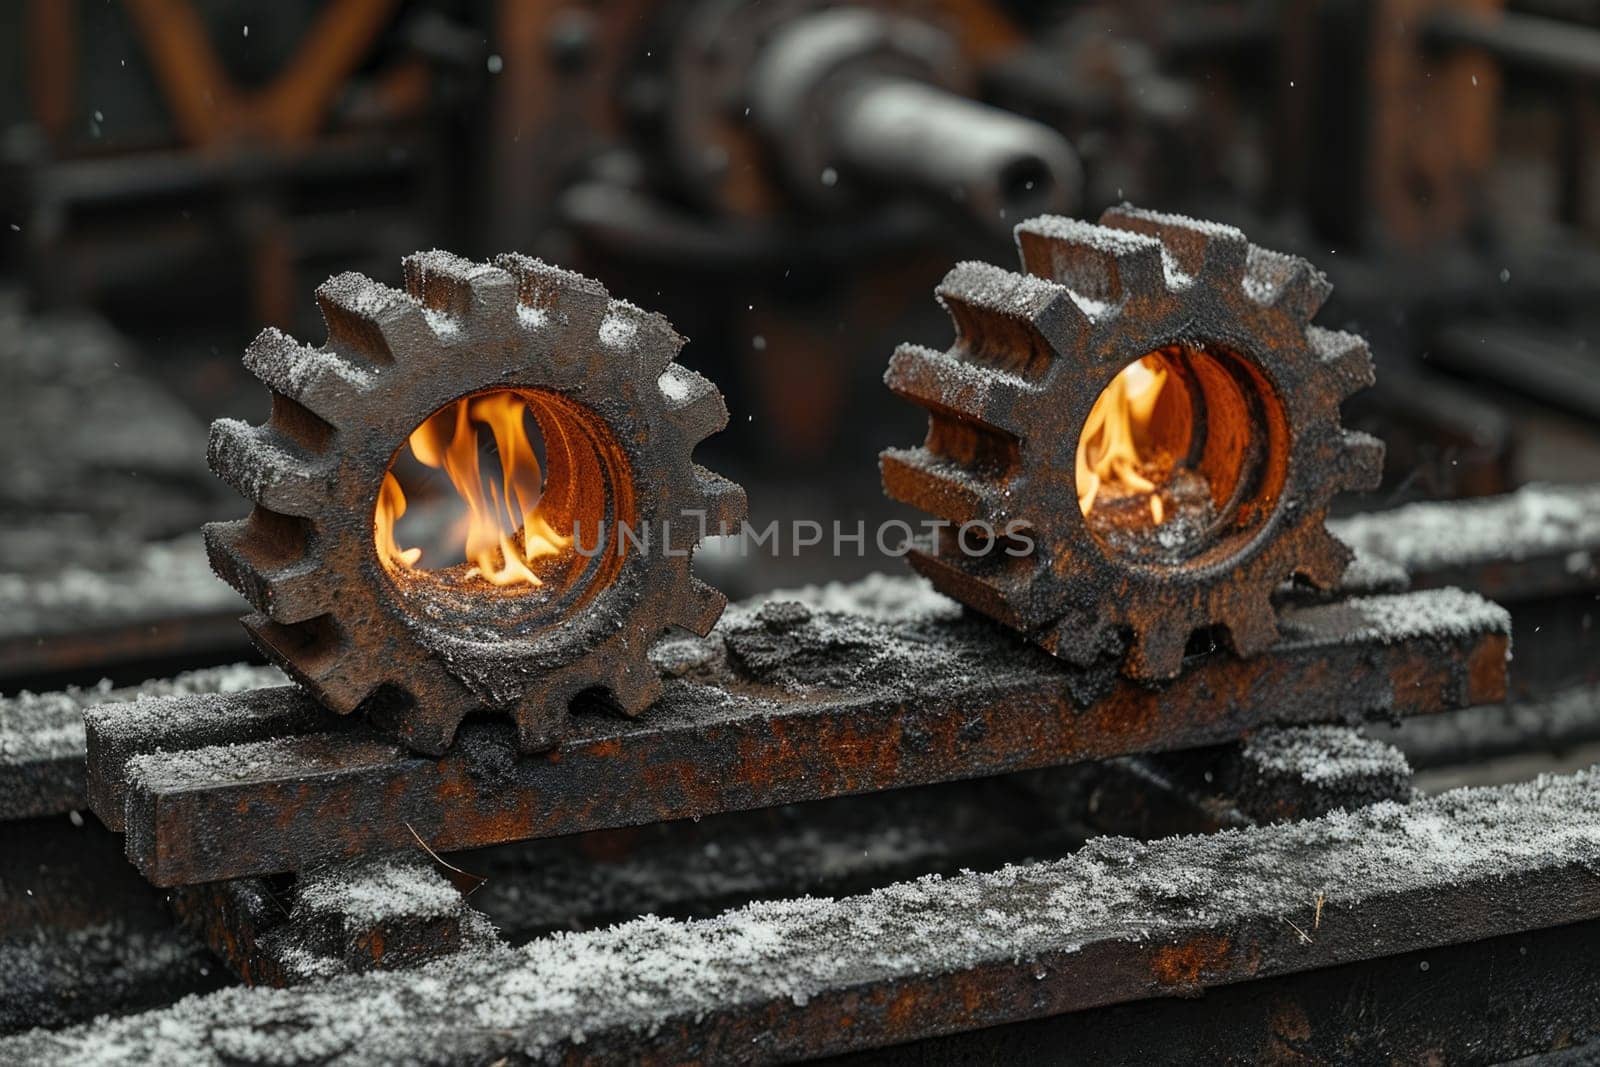 Details The gear is made of metal. Mechanical gears made of steel by Lobachad